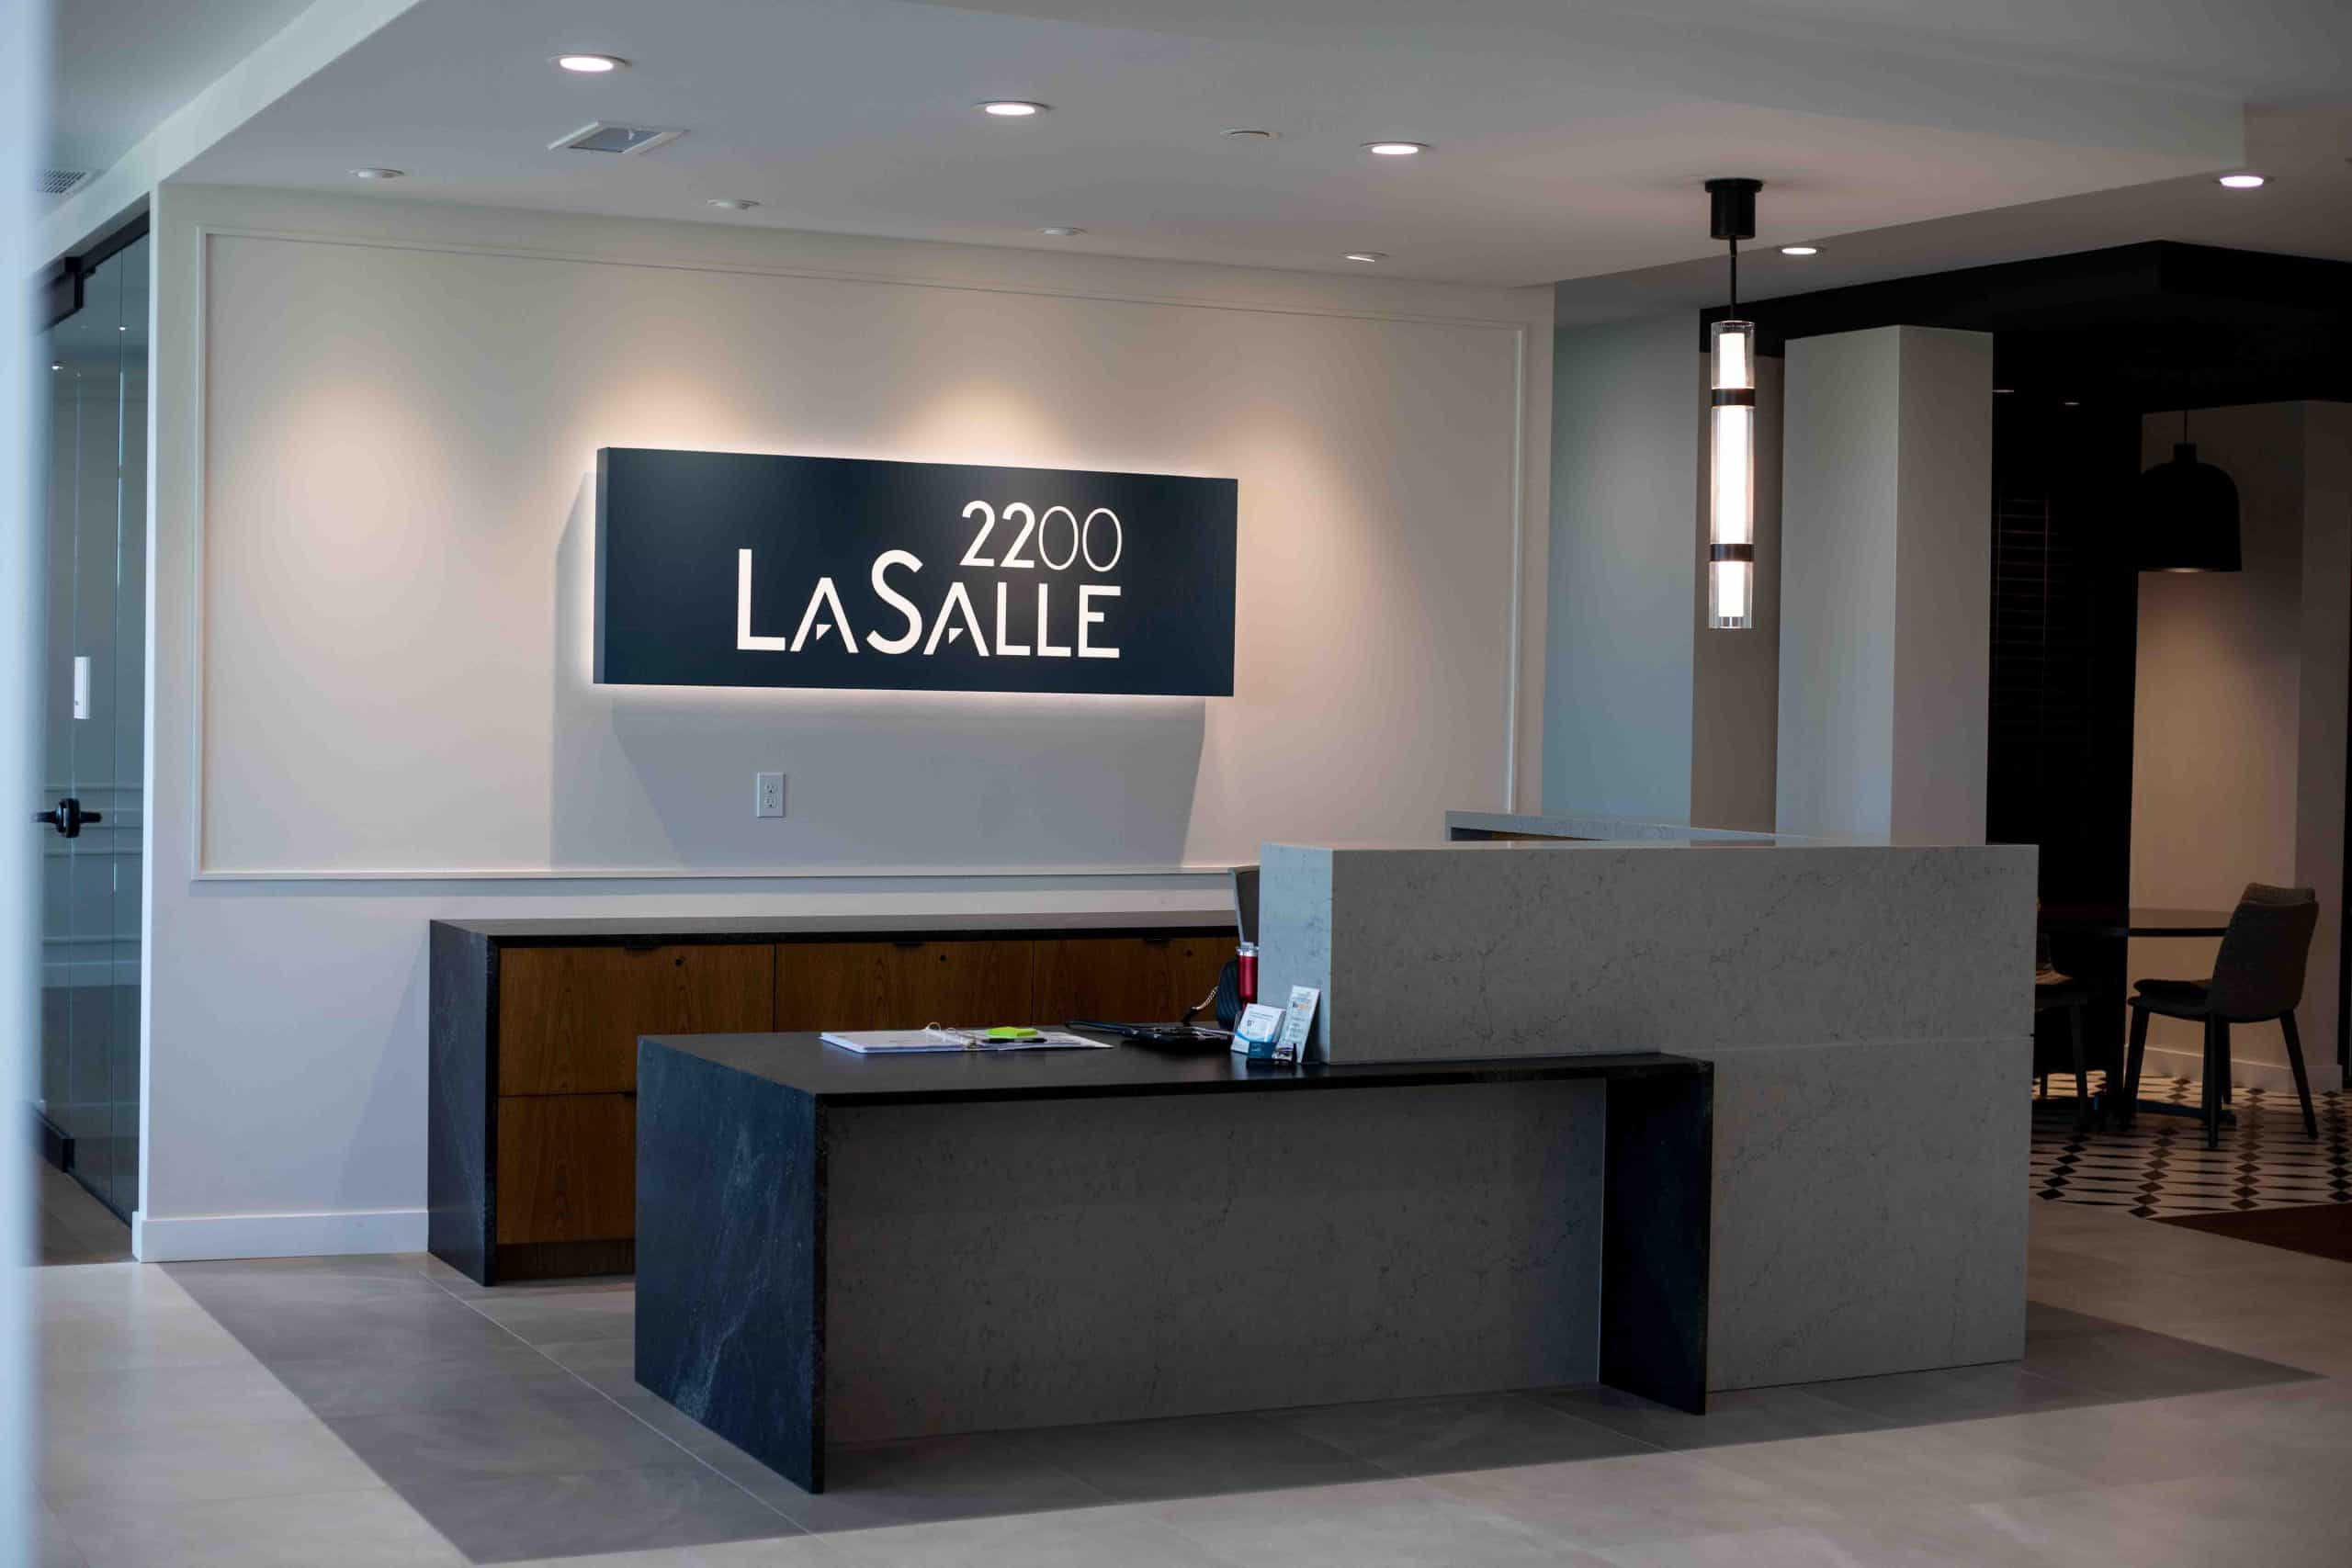 2200 LaSalle Apartment Building backlit cabinet sign for lobby